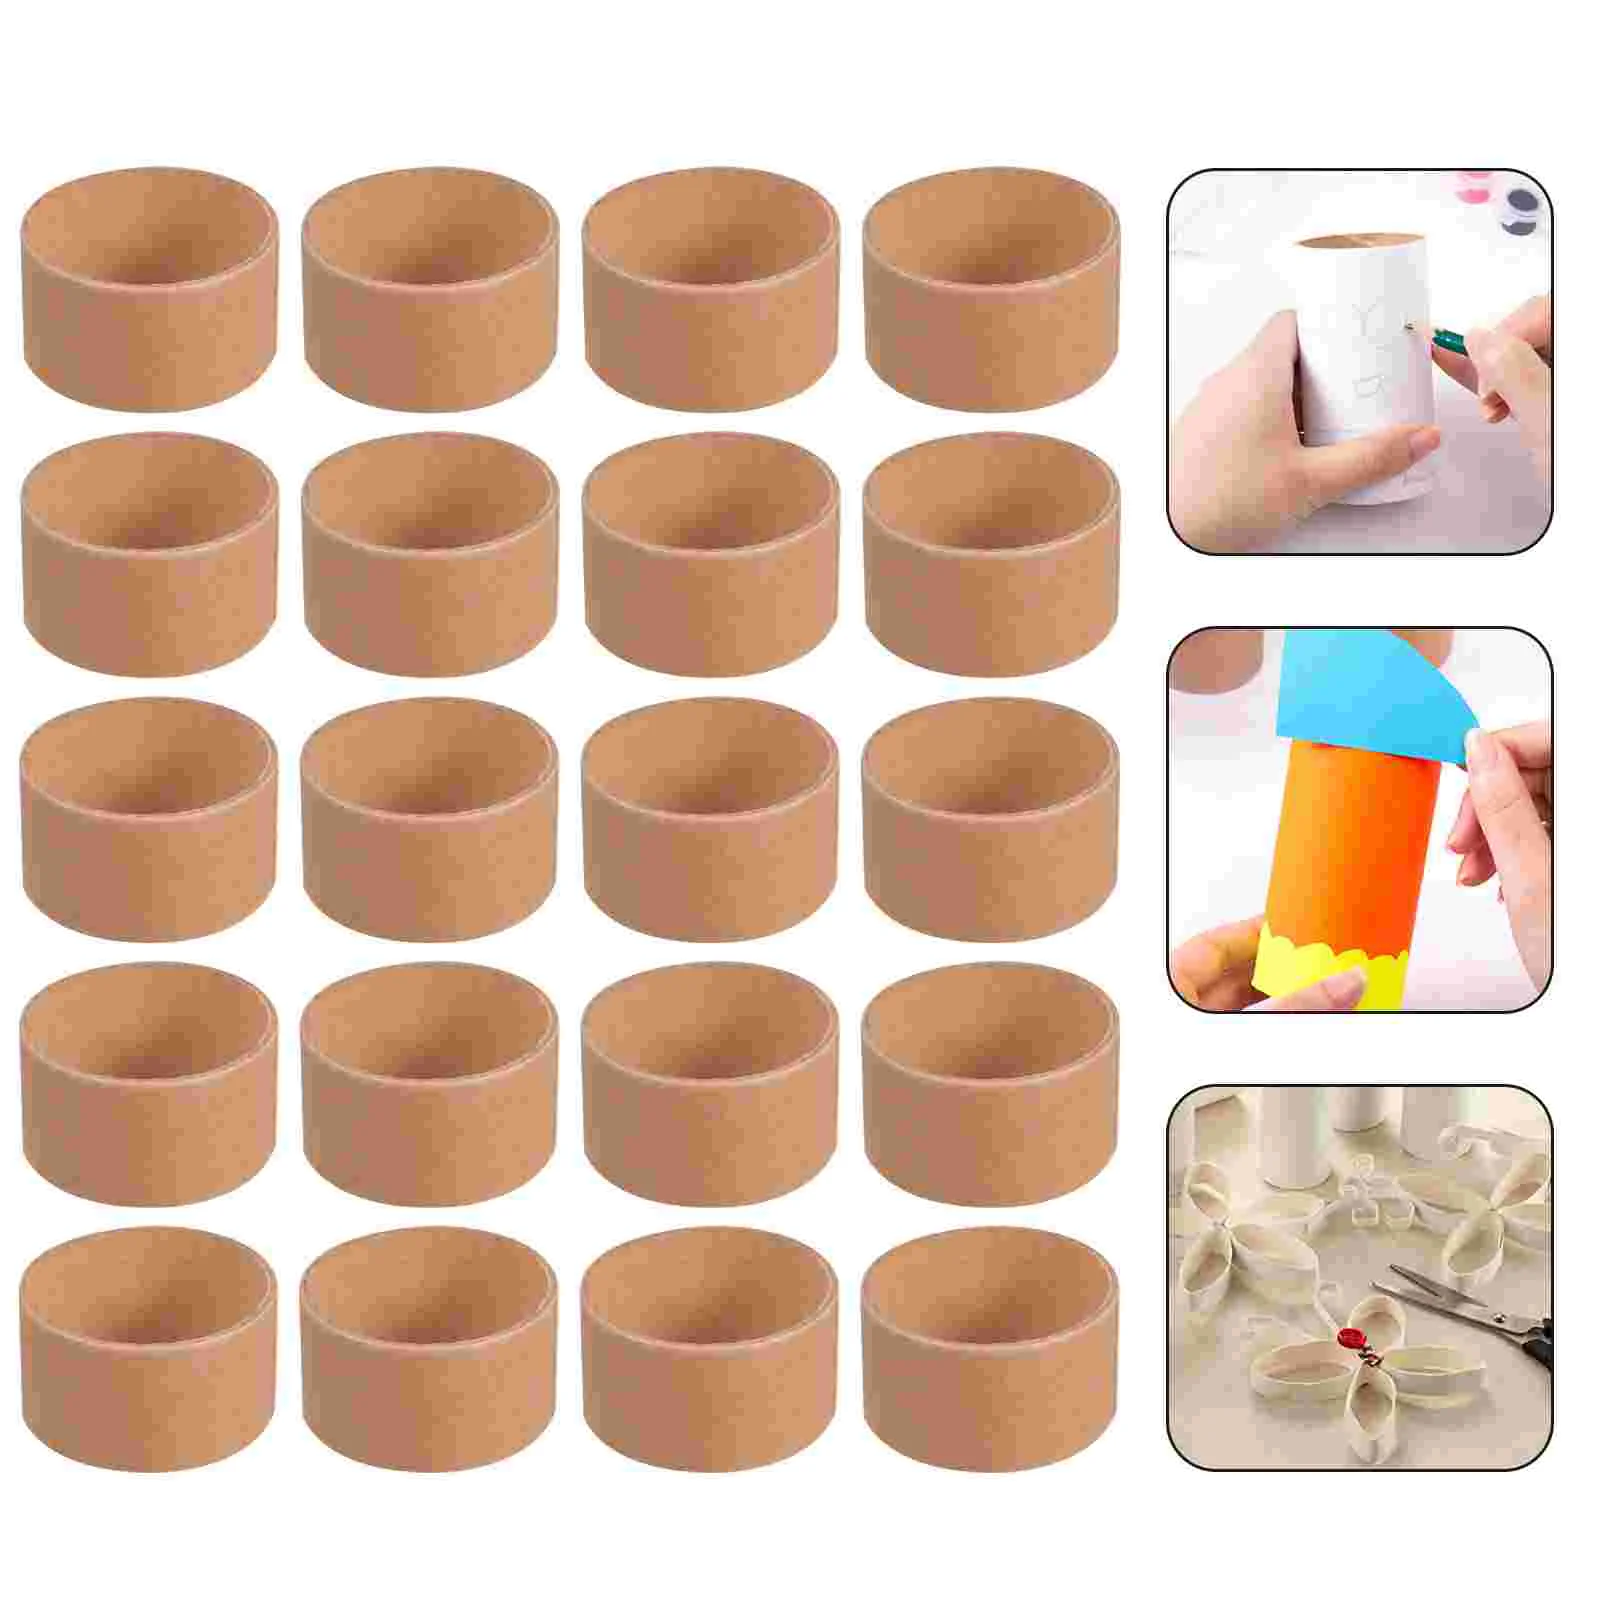 Paper Cardboard Roll Crafts Toilet Tubes Tubes Craftroll Kraft Round Towel Brown Crafts Diy Art Tube Empty Small Thin Blank images - 6